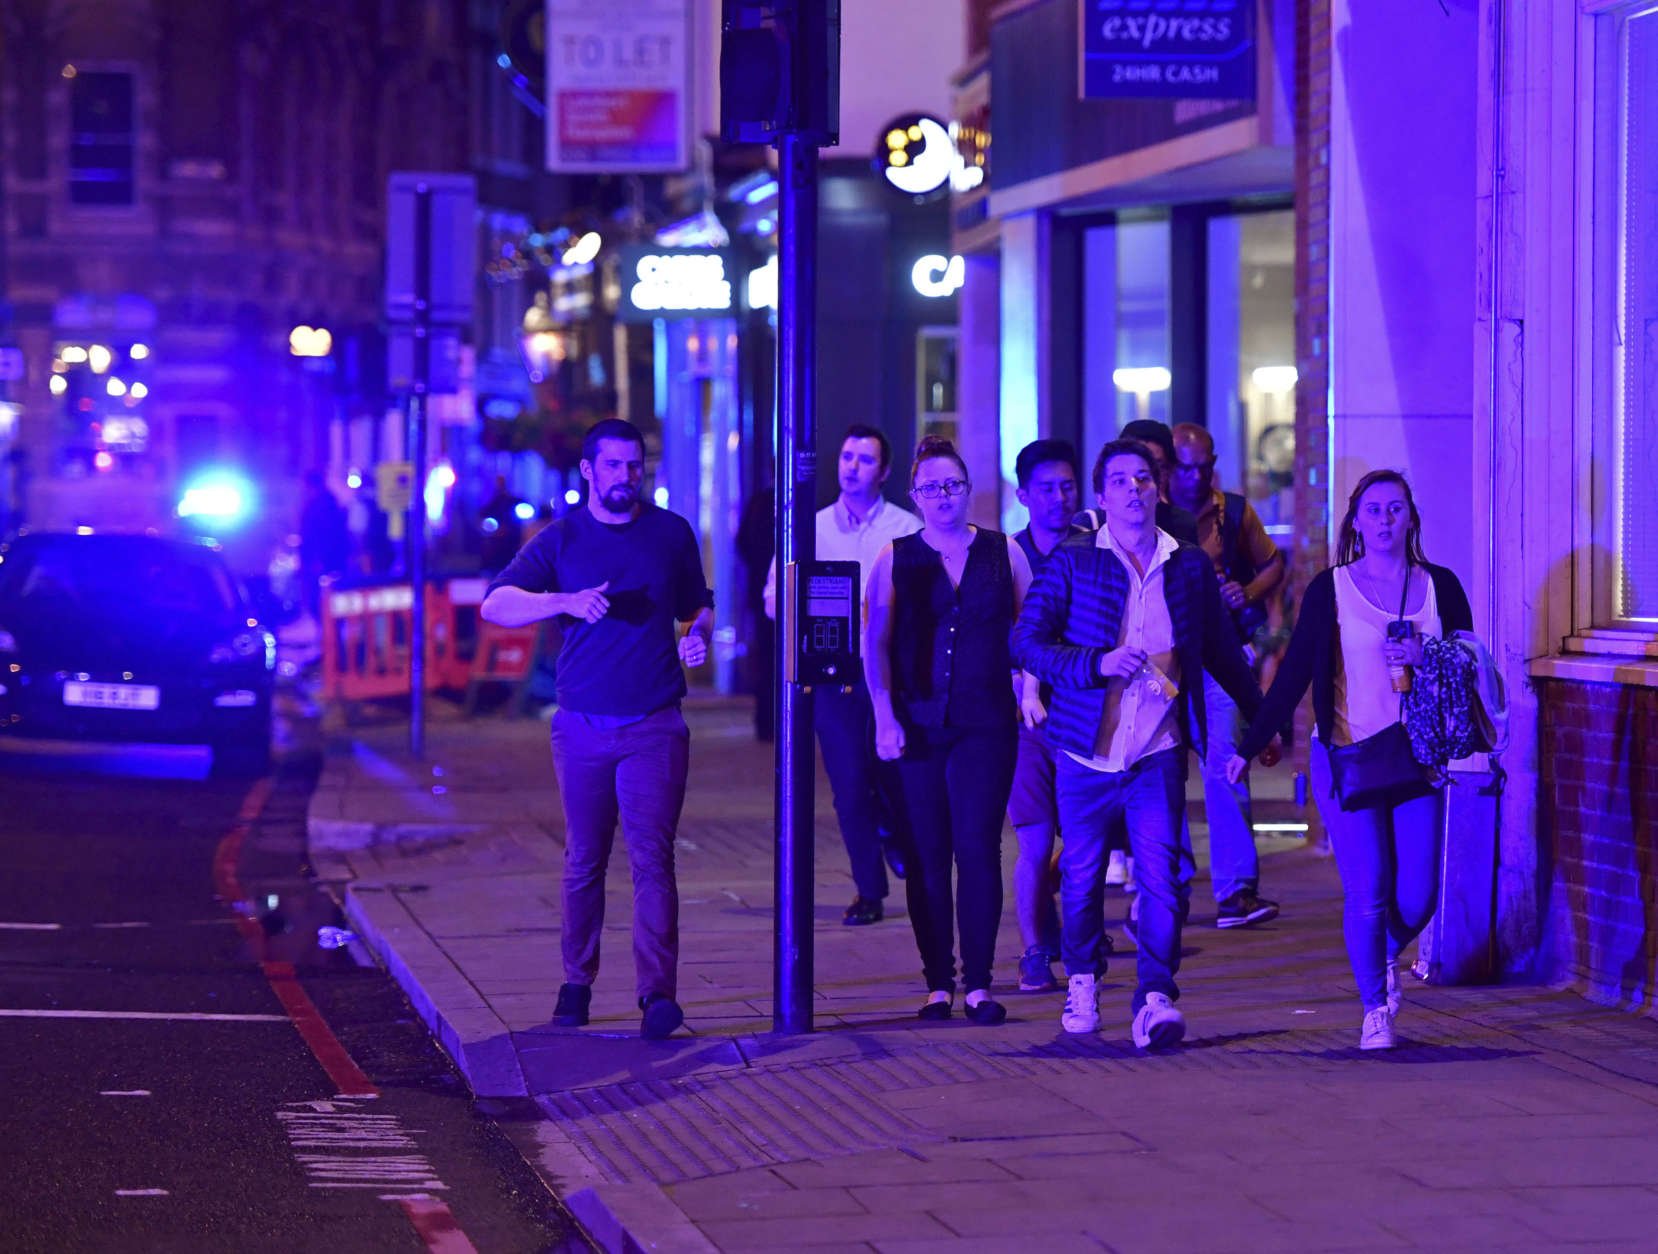 People run down Borough High Street as police are dealing with a "major incident" at London Bridge in London, Saturday, June 3, 2017. (Dominic Lipinski/PA via AP)